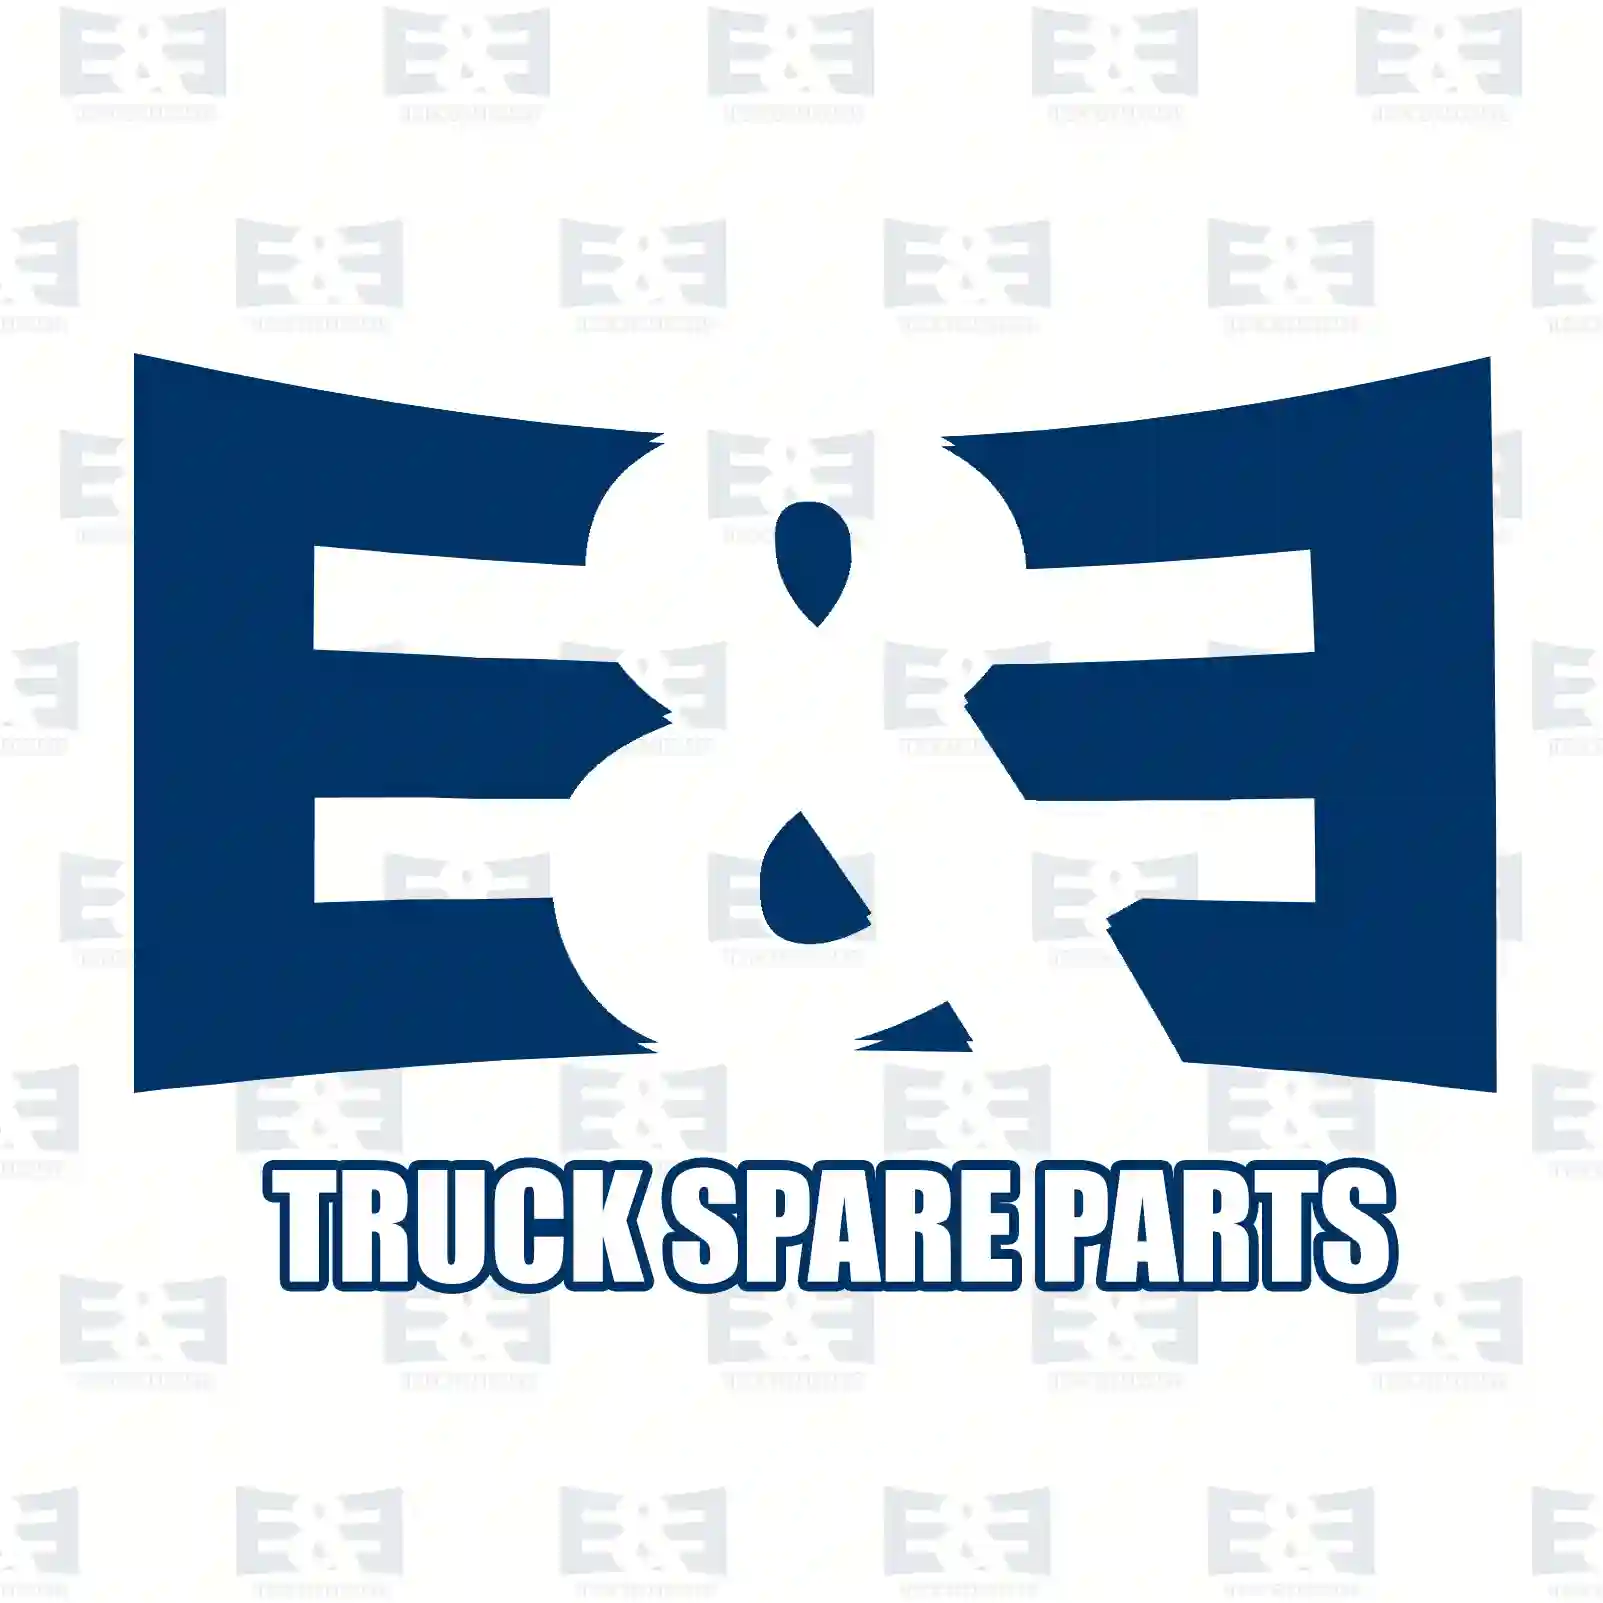  Steering column switch, lighting and flashing || E&E Truck Spare Parts | Truck Spare Parts, Auotomotive Spare Parts